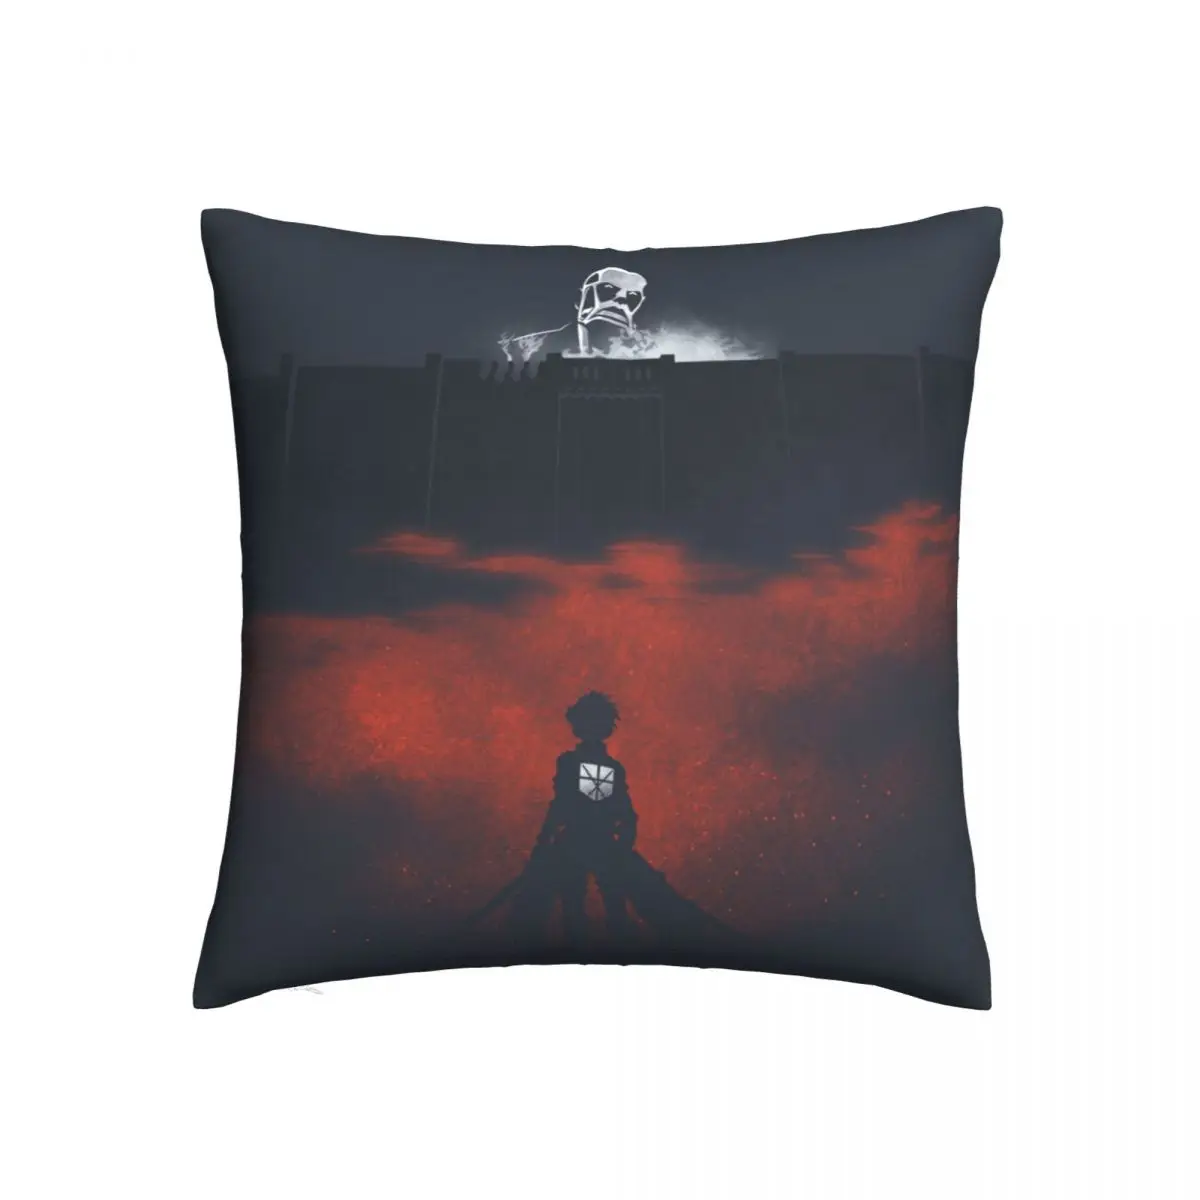 Giant Throw Pillow Case Attack on Titan Giant Fighting Anime Short Plus Cushion Covers Home Sofa Chair Decorative Backpack